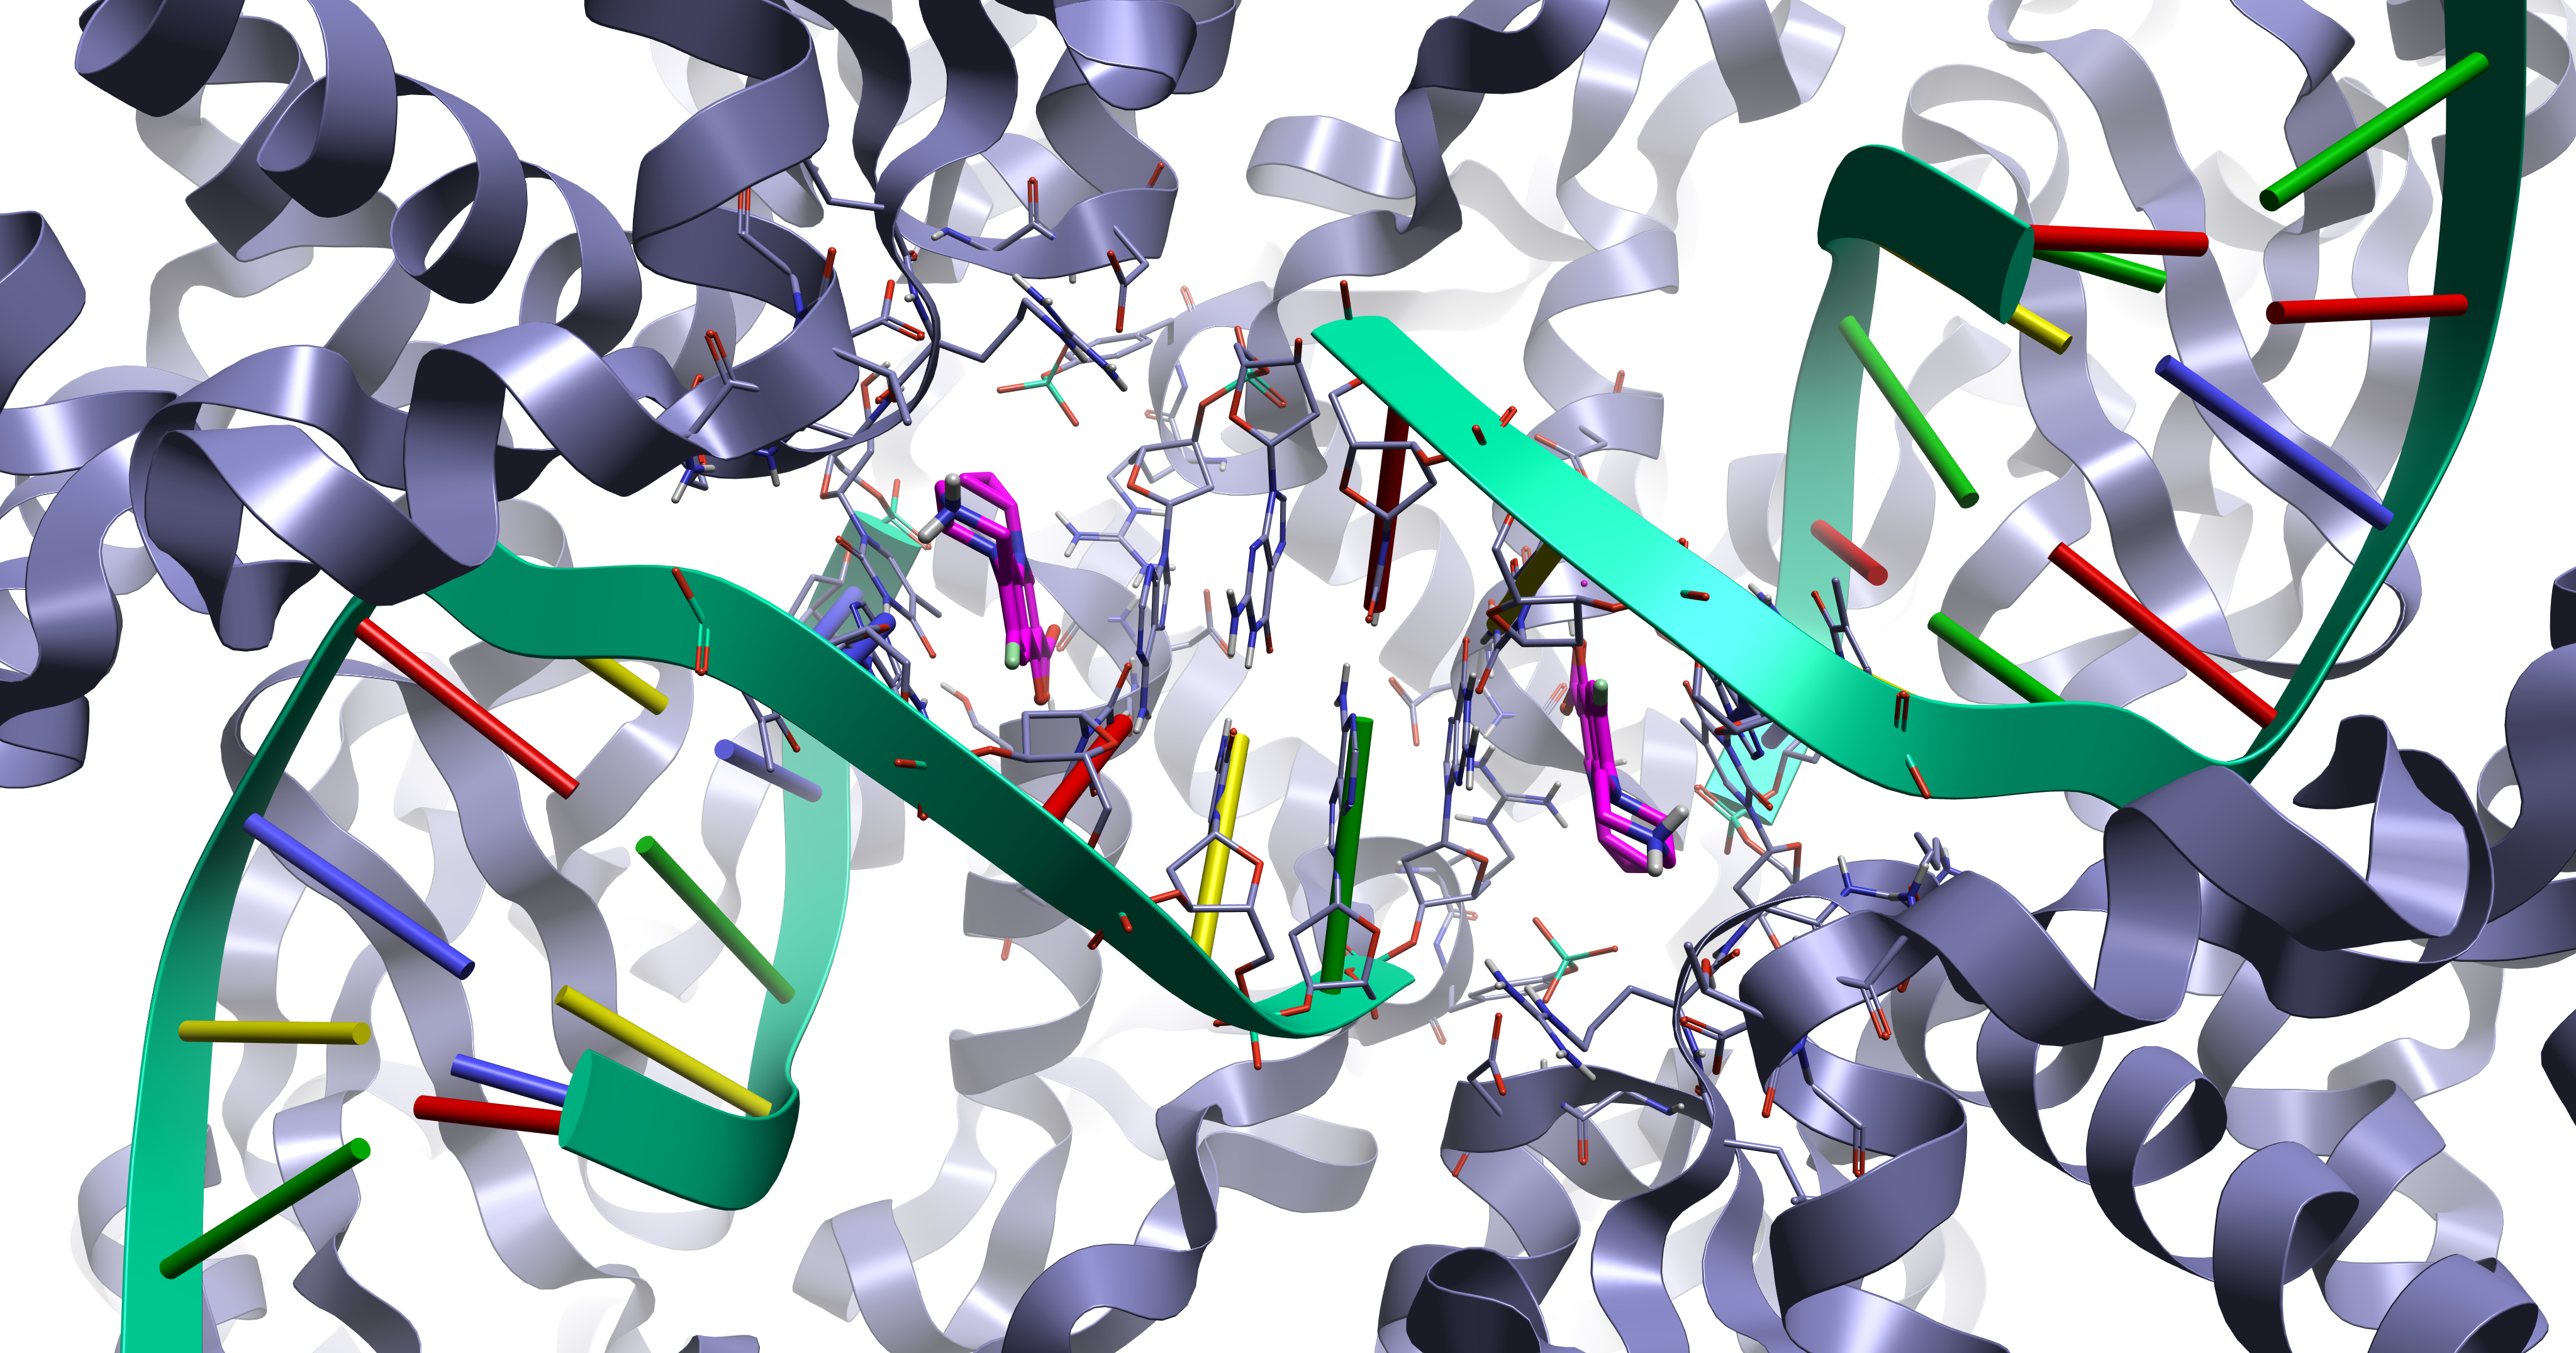 Figure 1. The 5btc crystal structure displaying the fluoroquinolone intercalation DNA binding mode.